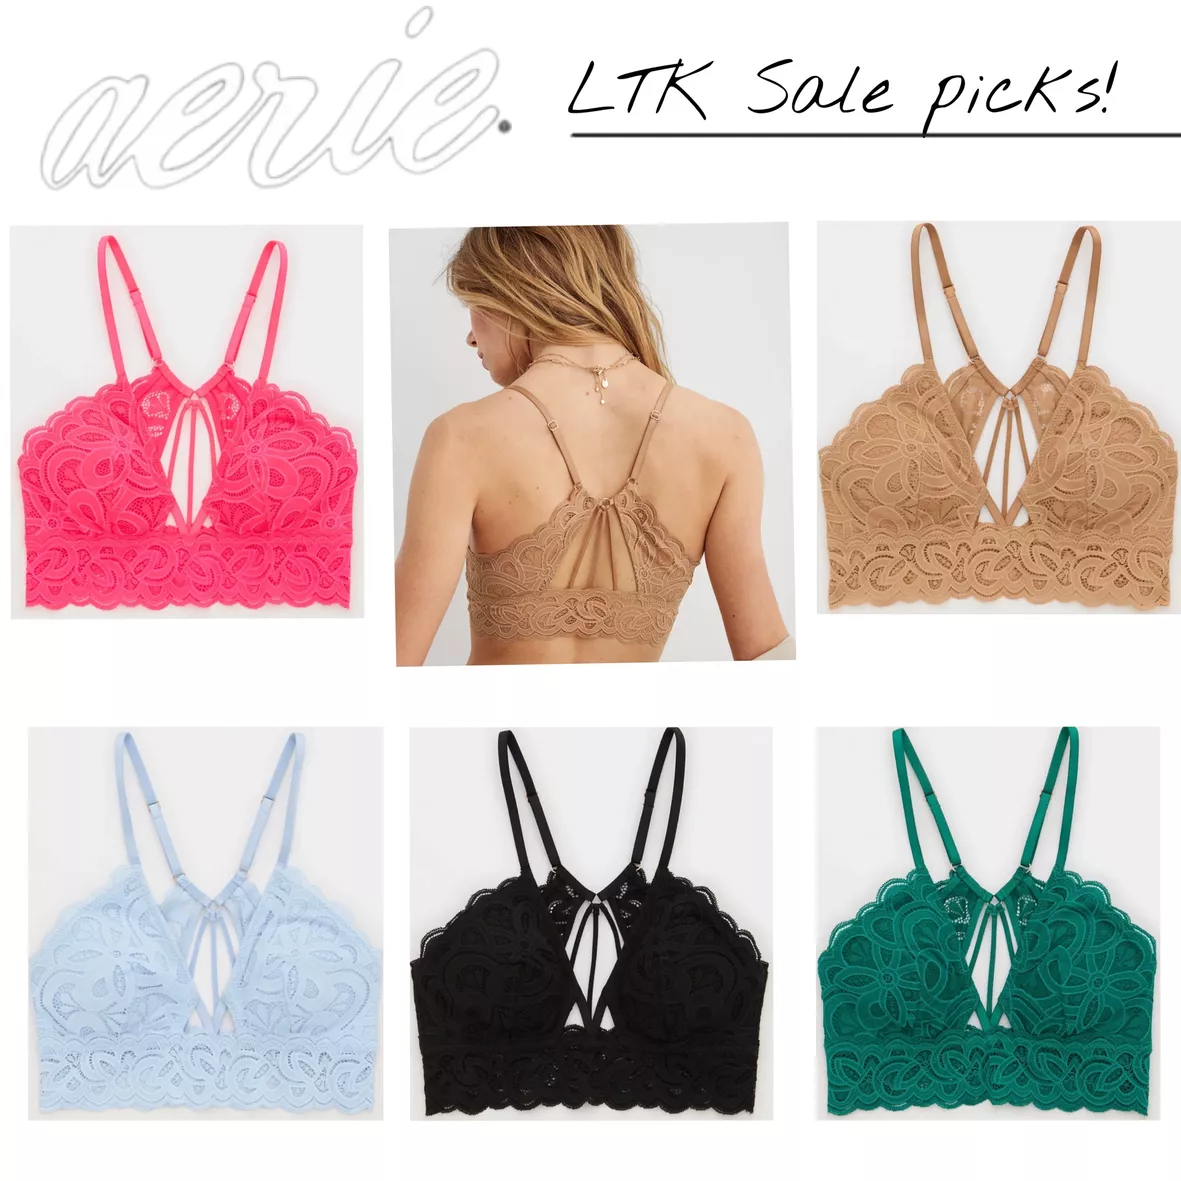 Show Off Rooftop Garden Lace Padded Plunge Bralette